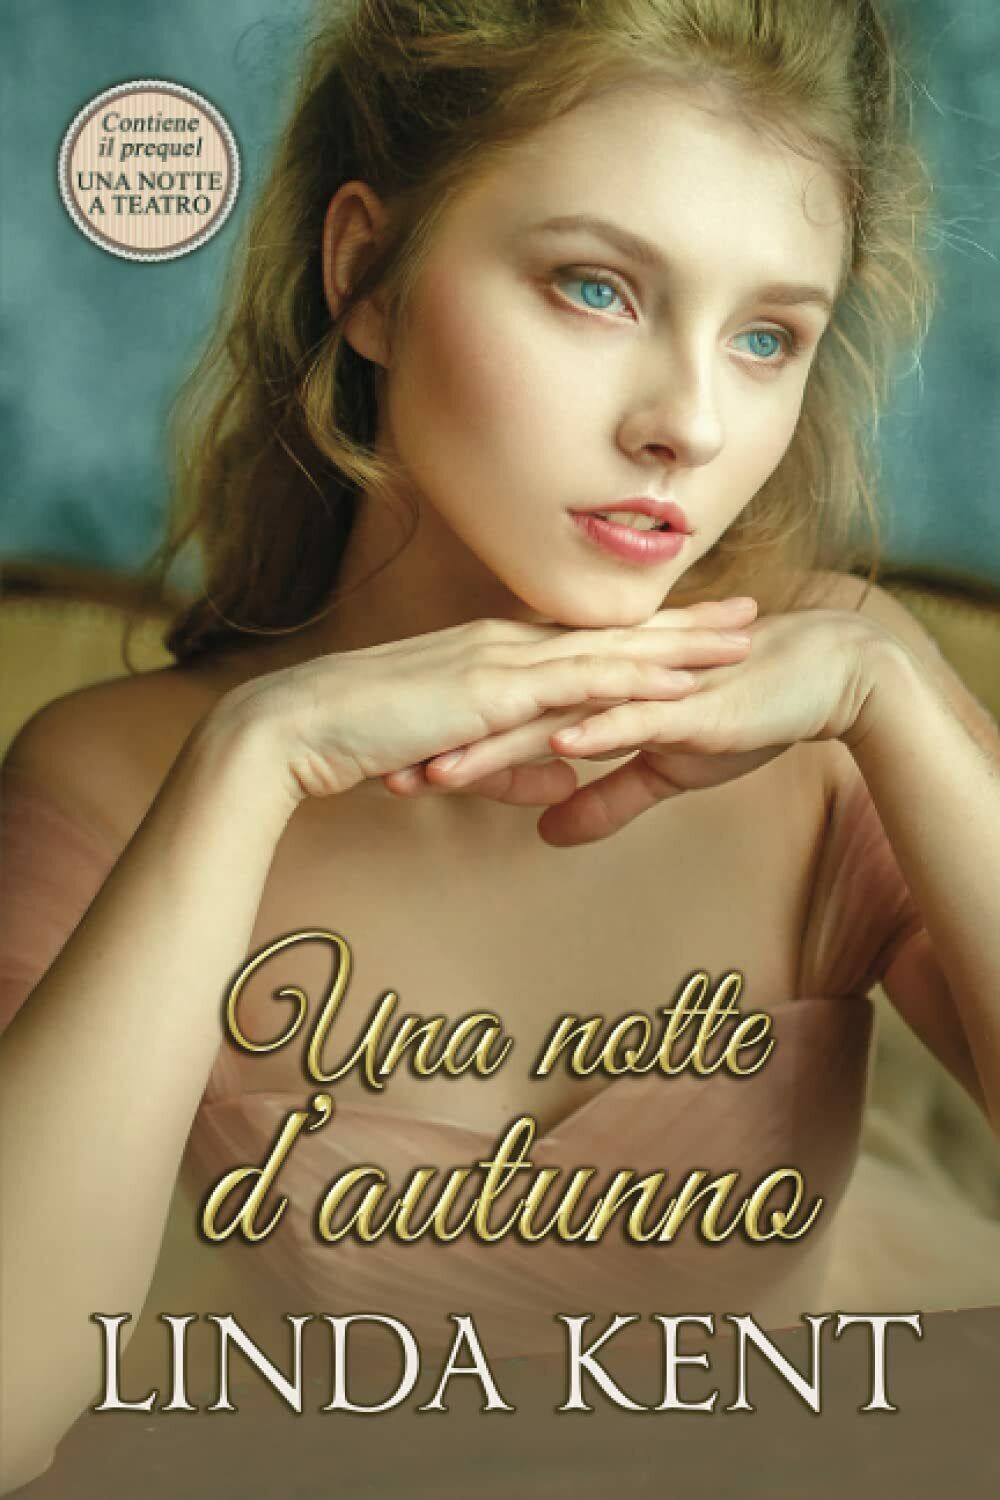 Una Notte d'autunno di Linda Kent,  2021,  Indipendently Published